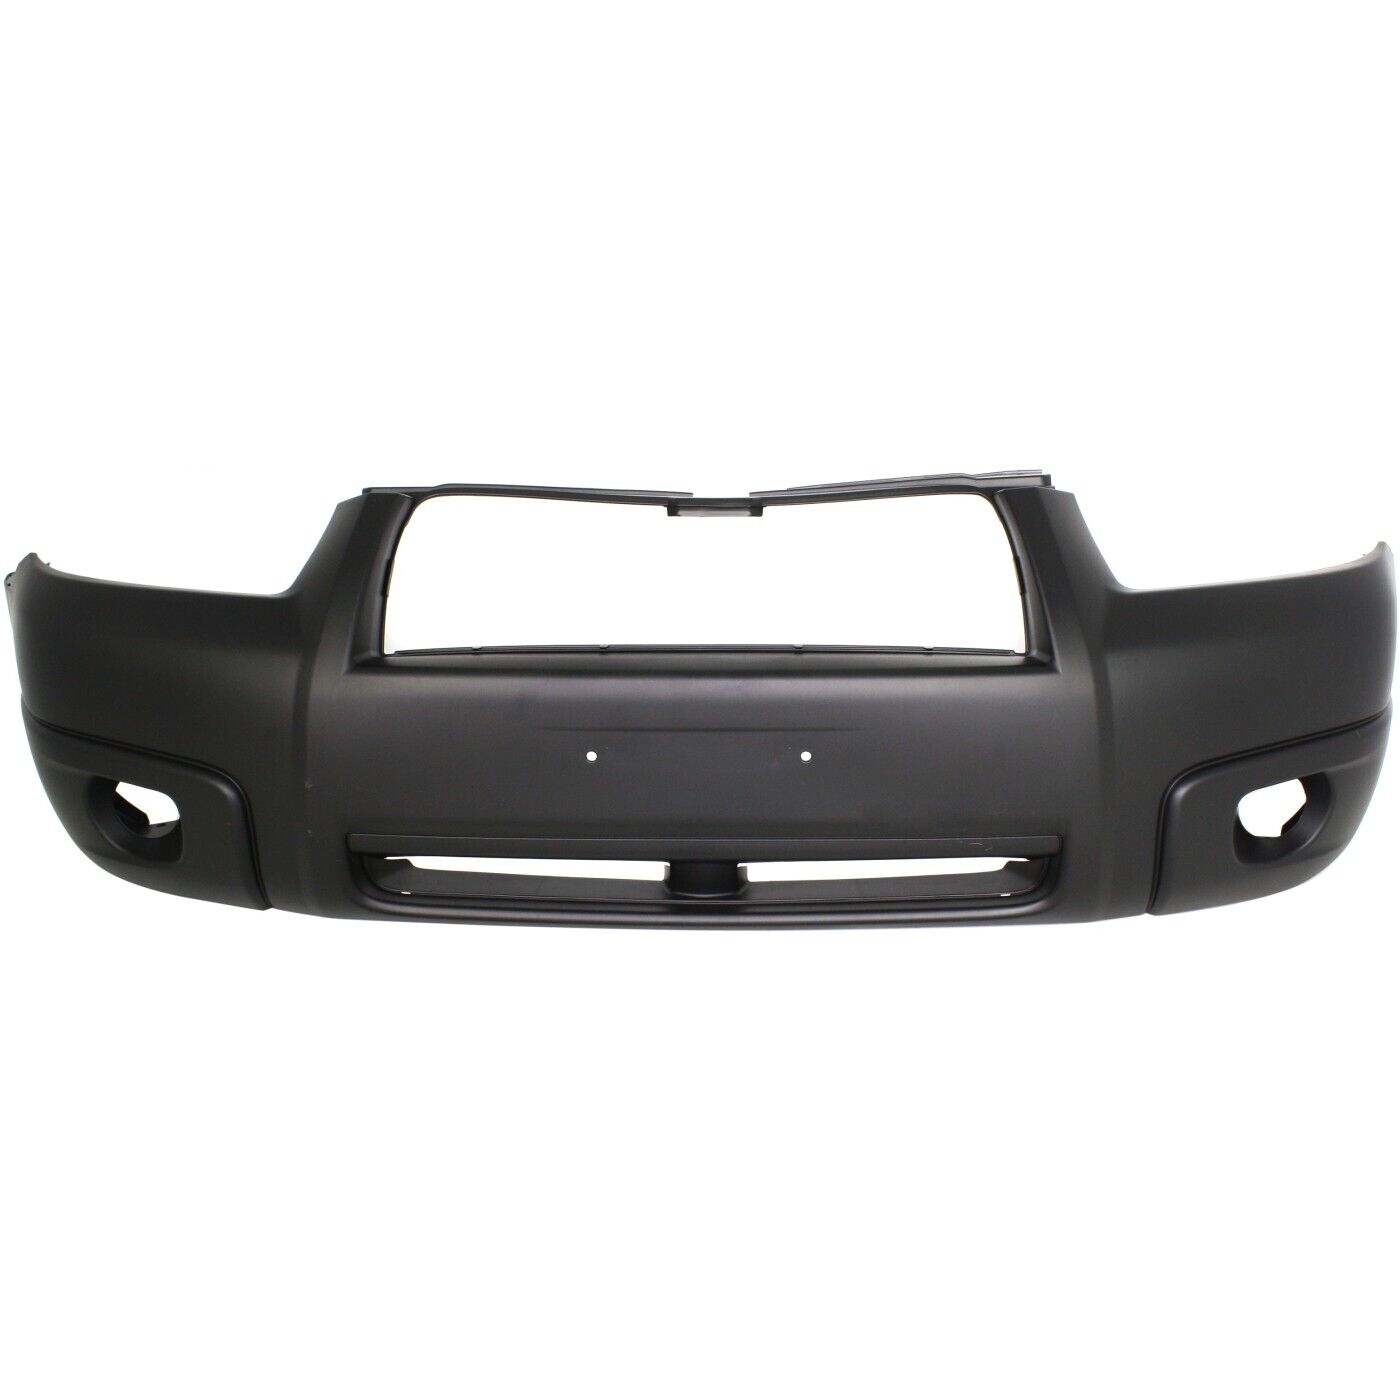 Front Bumper Cover For 2006-2008 Subaru Forester w/ fog lamp holes Primed